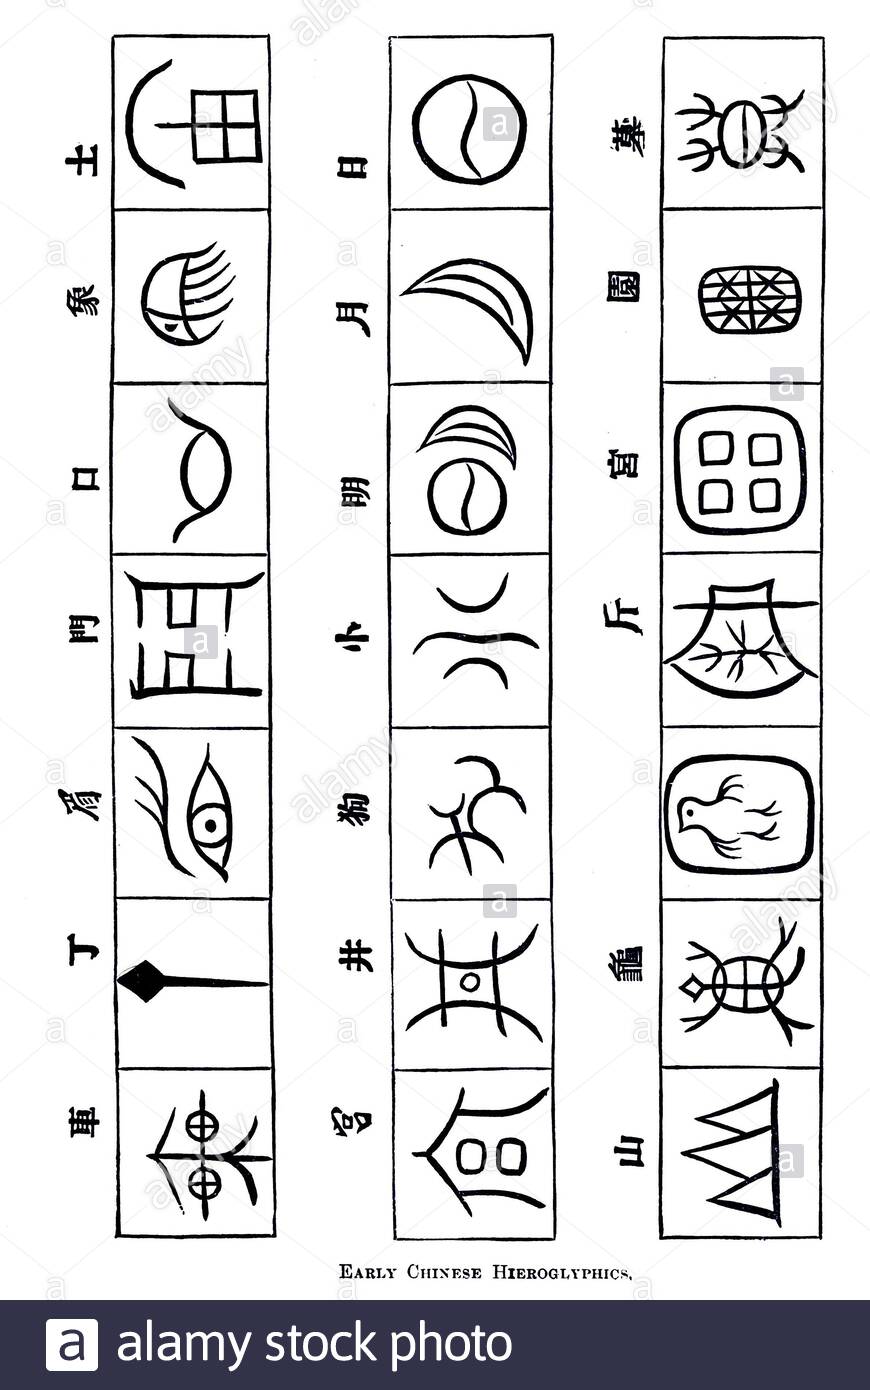 Early Chinese Hieroglyphics, vintage illustration from 1886 Stock Photo